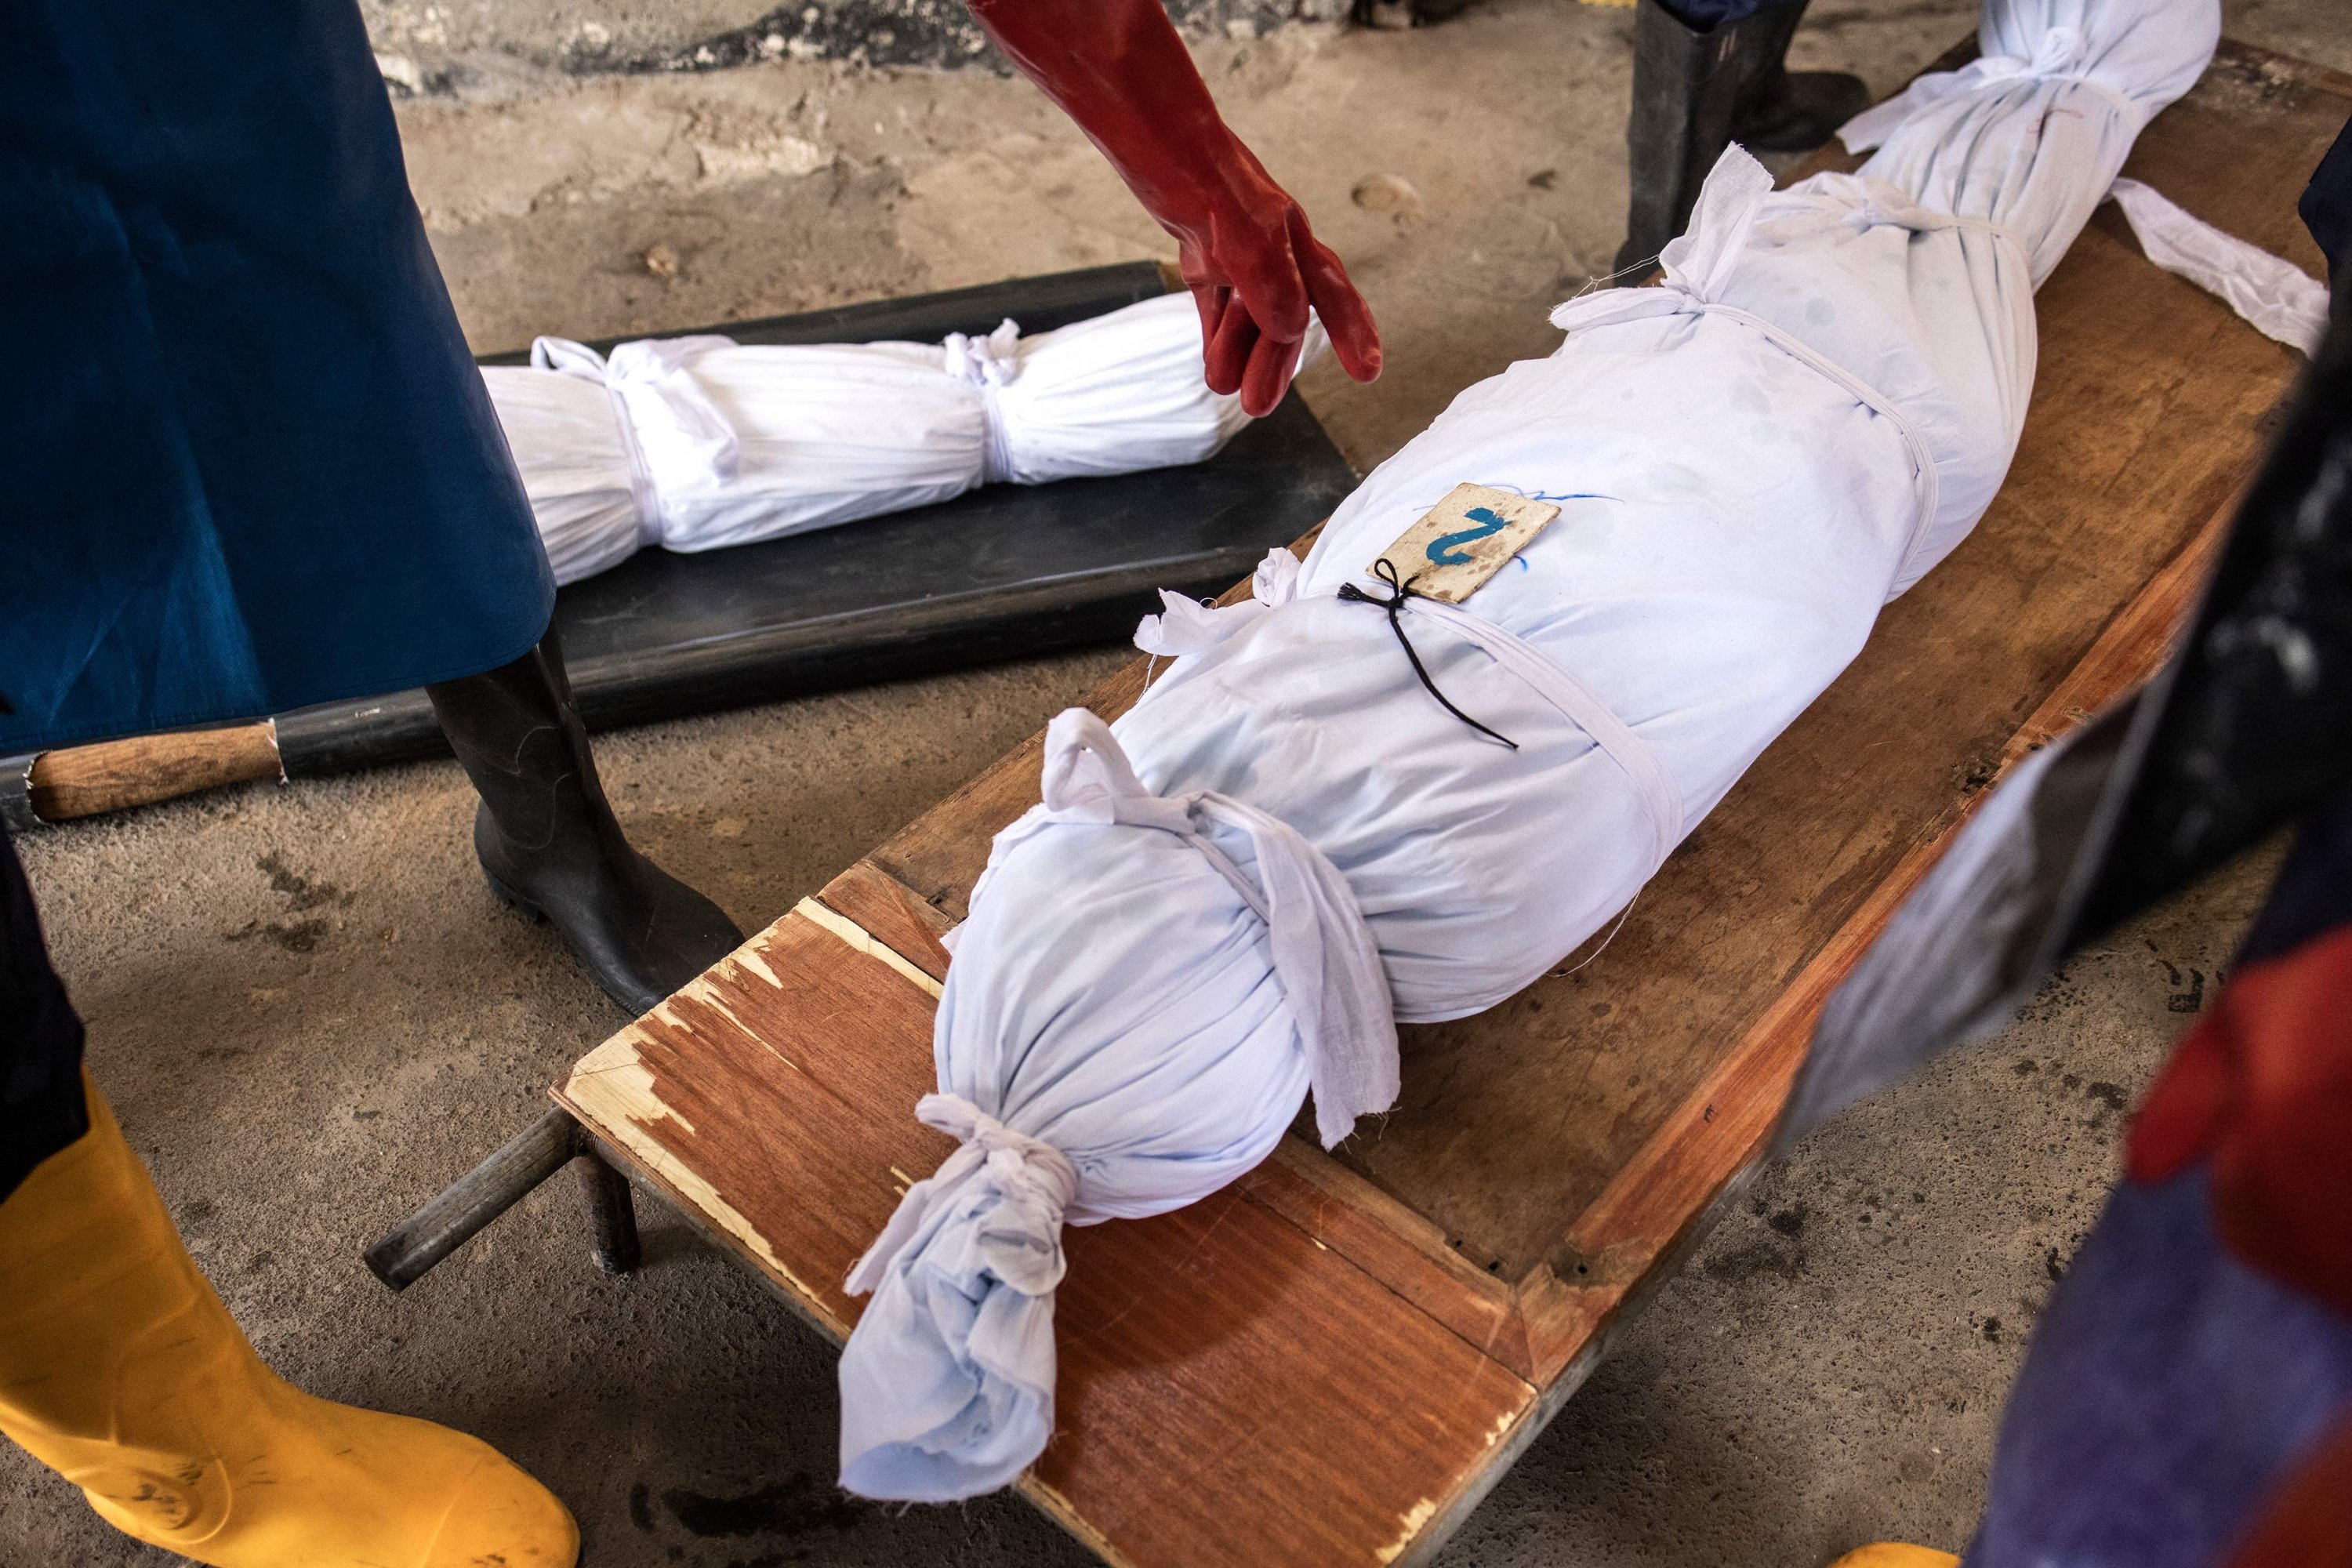 Volunteers of the Association For Solidarity and Perfection (JRWI) help sort one of the 28 unidentified corpses that will be loaded into a van in Dakar, Senegal, March 28, 2021. (AFP Photo)